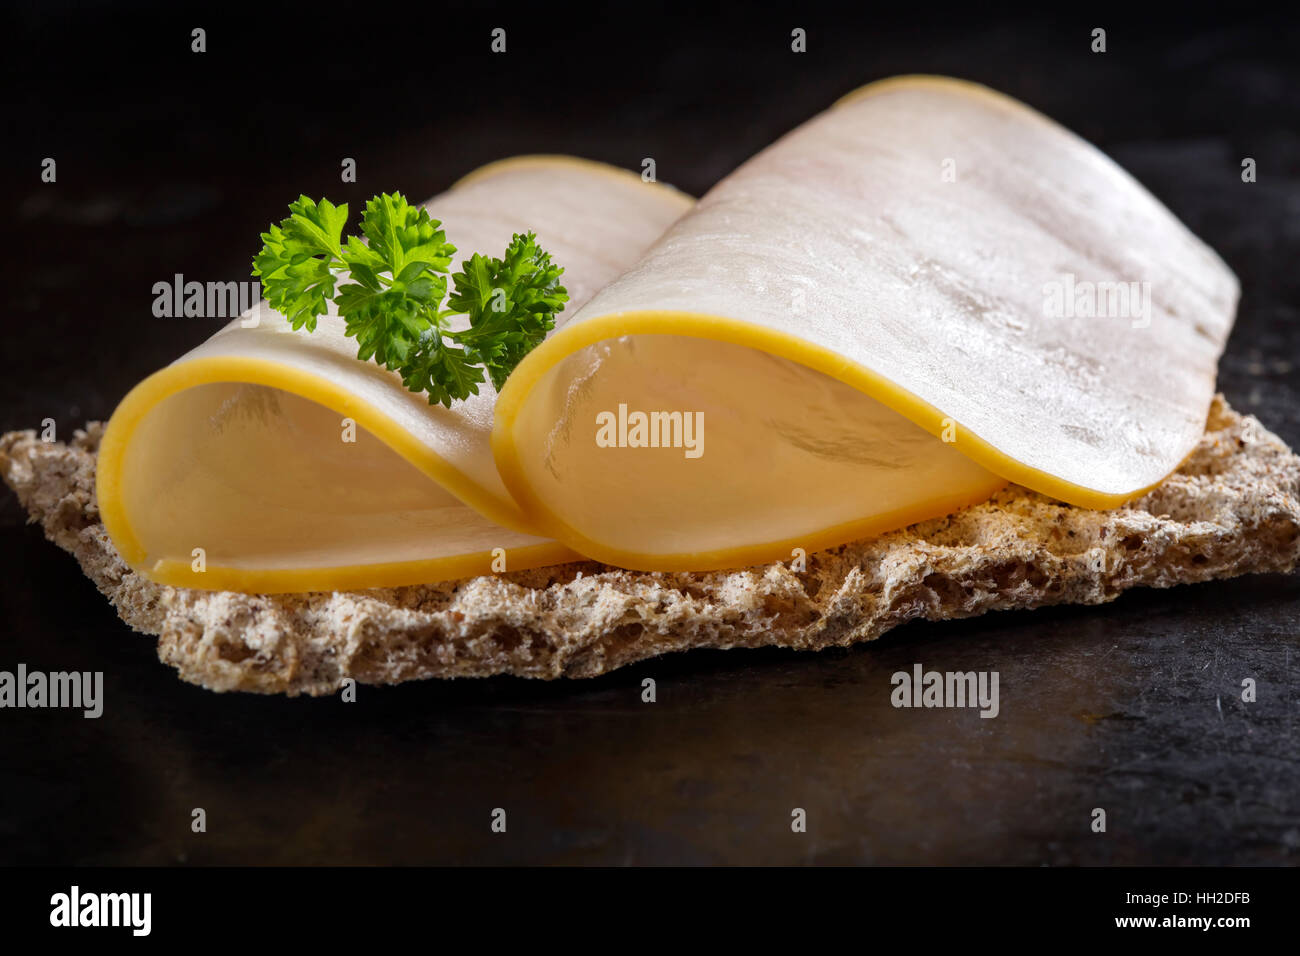 Pop-up thermometer timer in a smoked turkey Stock Photo - Alamy